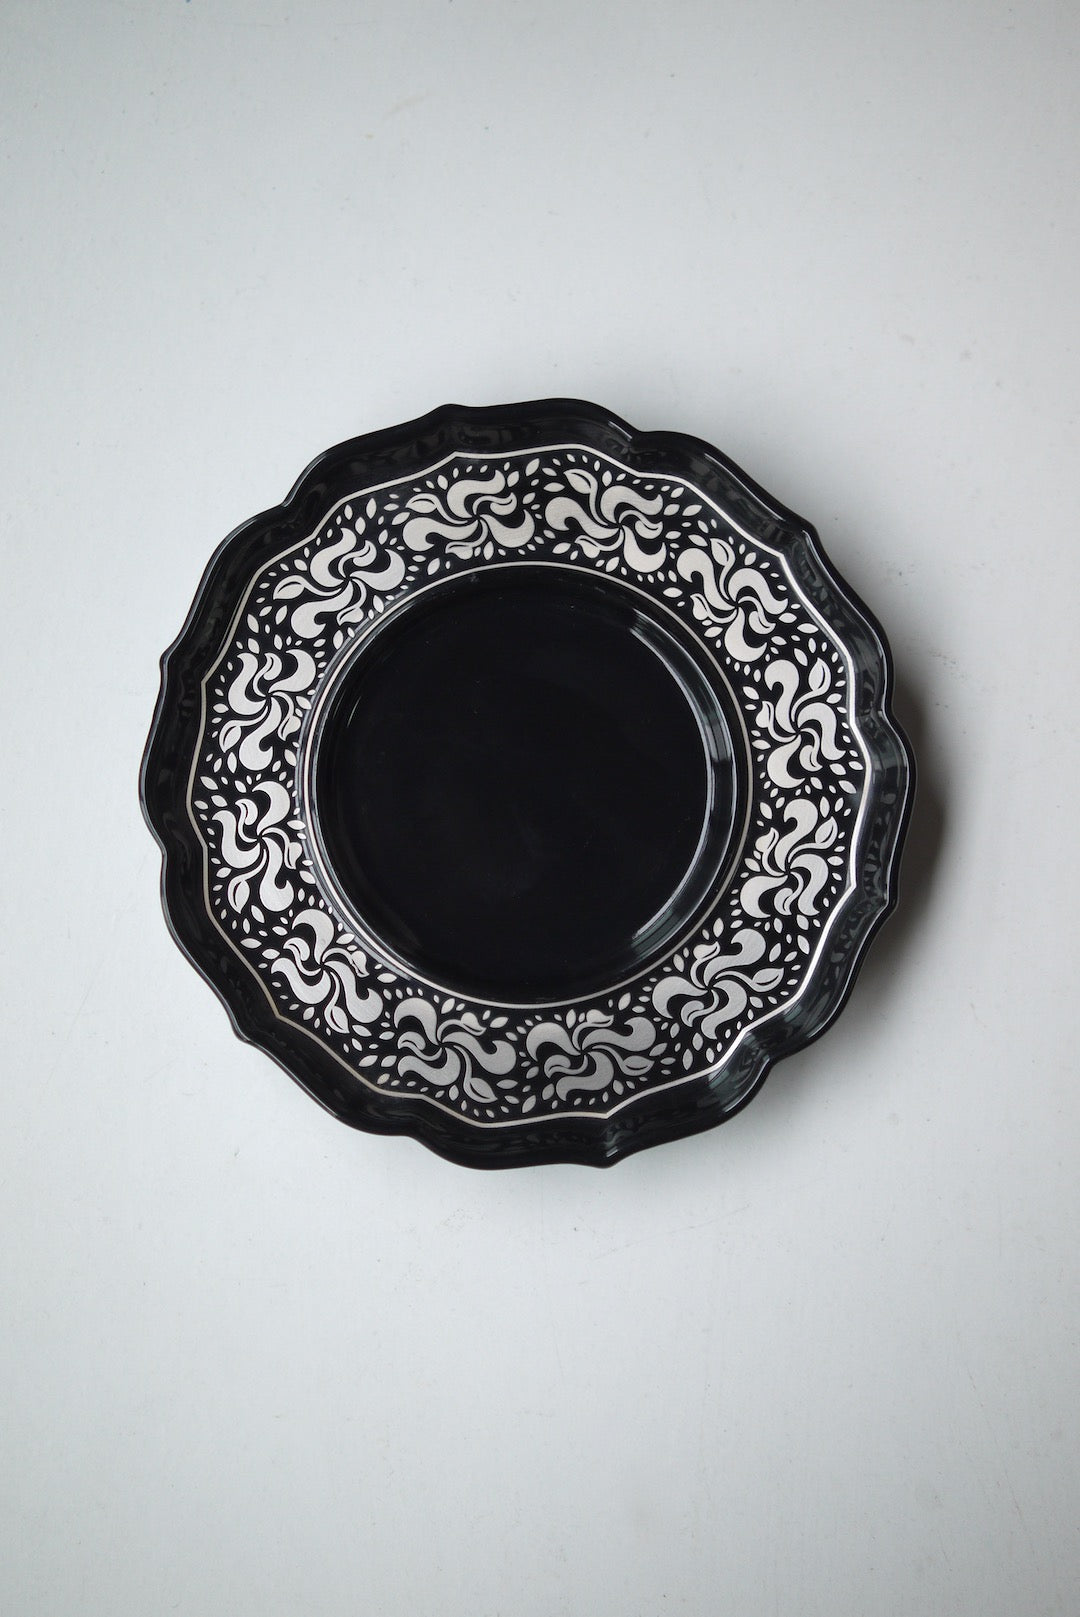 Black Porcelain Gaiwan With Gold Silver Traditional Chines Patterns|Best Ceraimcs